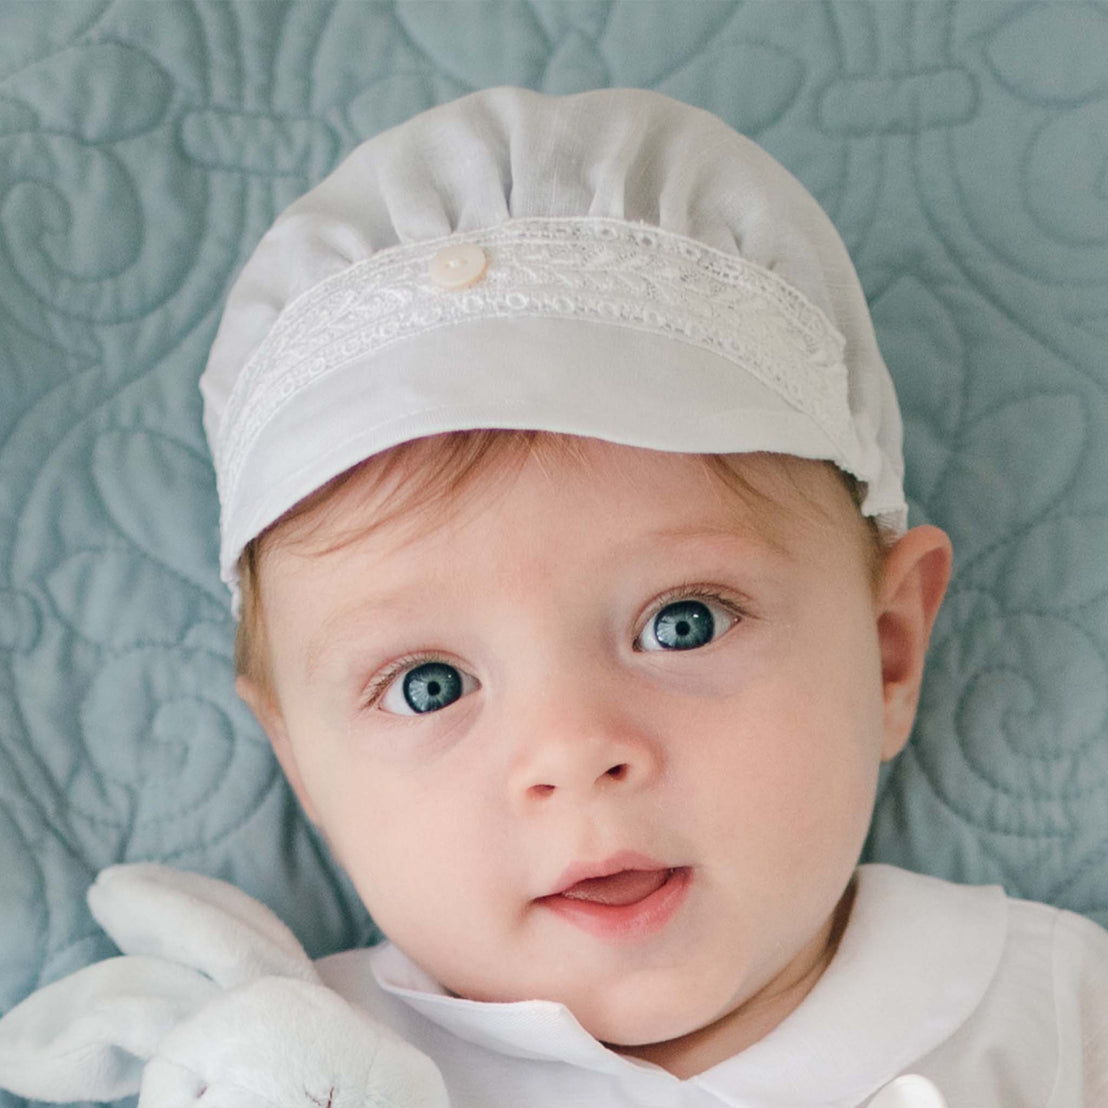 A baby with blue eyes wearing a white Oliver Linen Cap and white clothing is looking at the camera. The baby is lying on a light blue quilted surface. One of the baby's hands, partially visible, holds a small white plush toy adorned with delicate Venice lace.